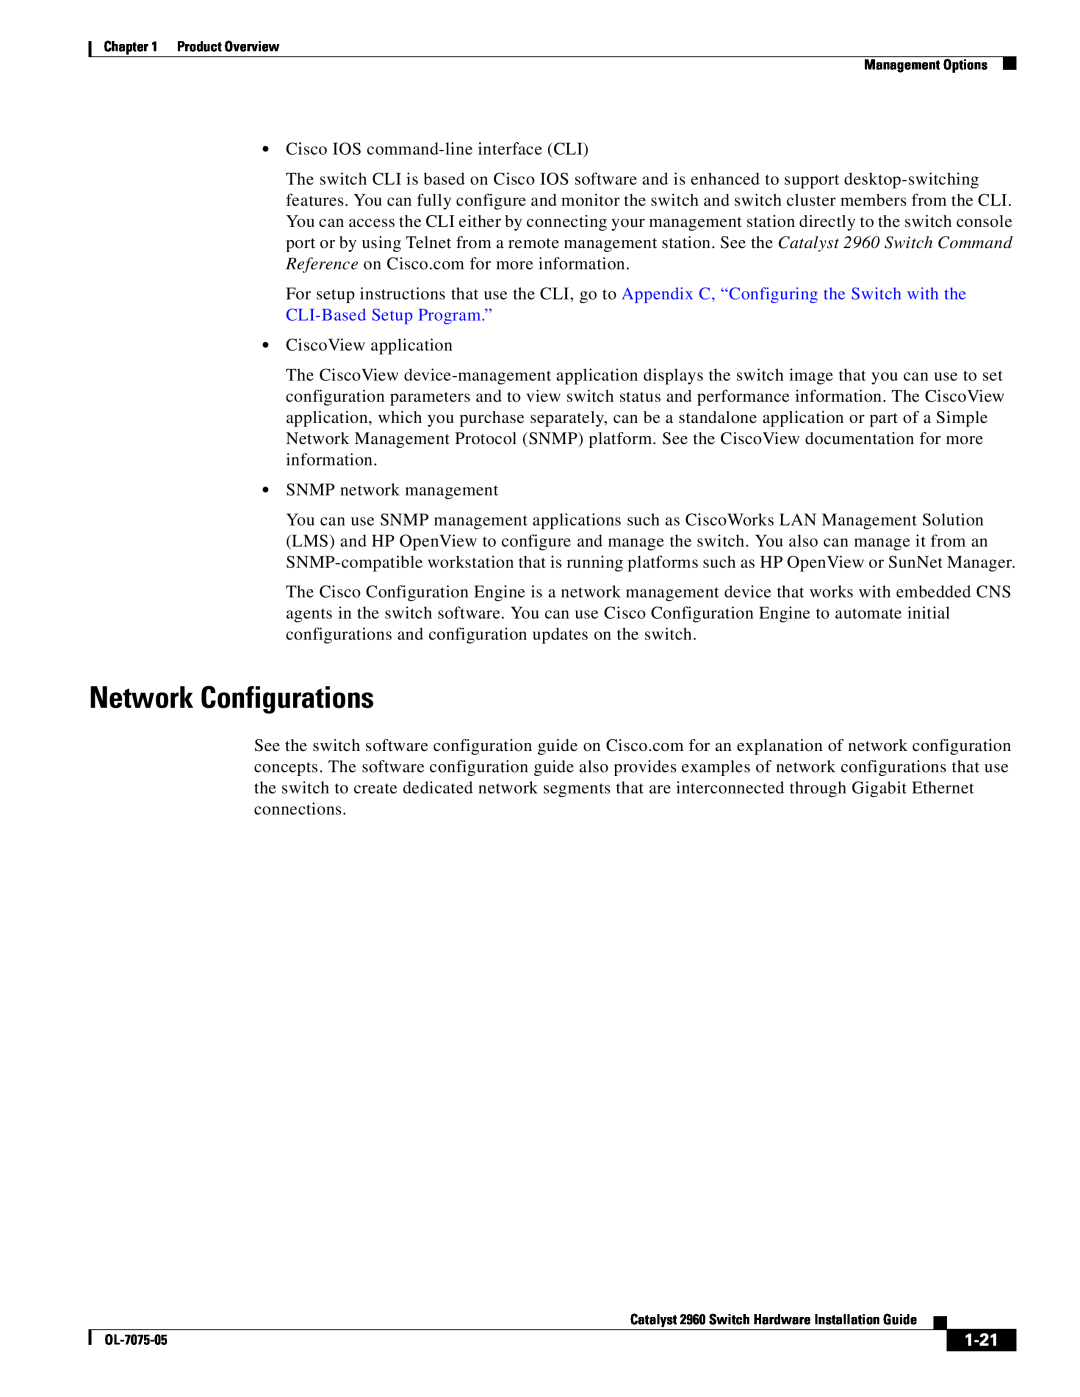 Cisco Systems 2960 specifications Network Configurations, 1-21 